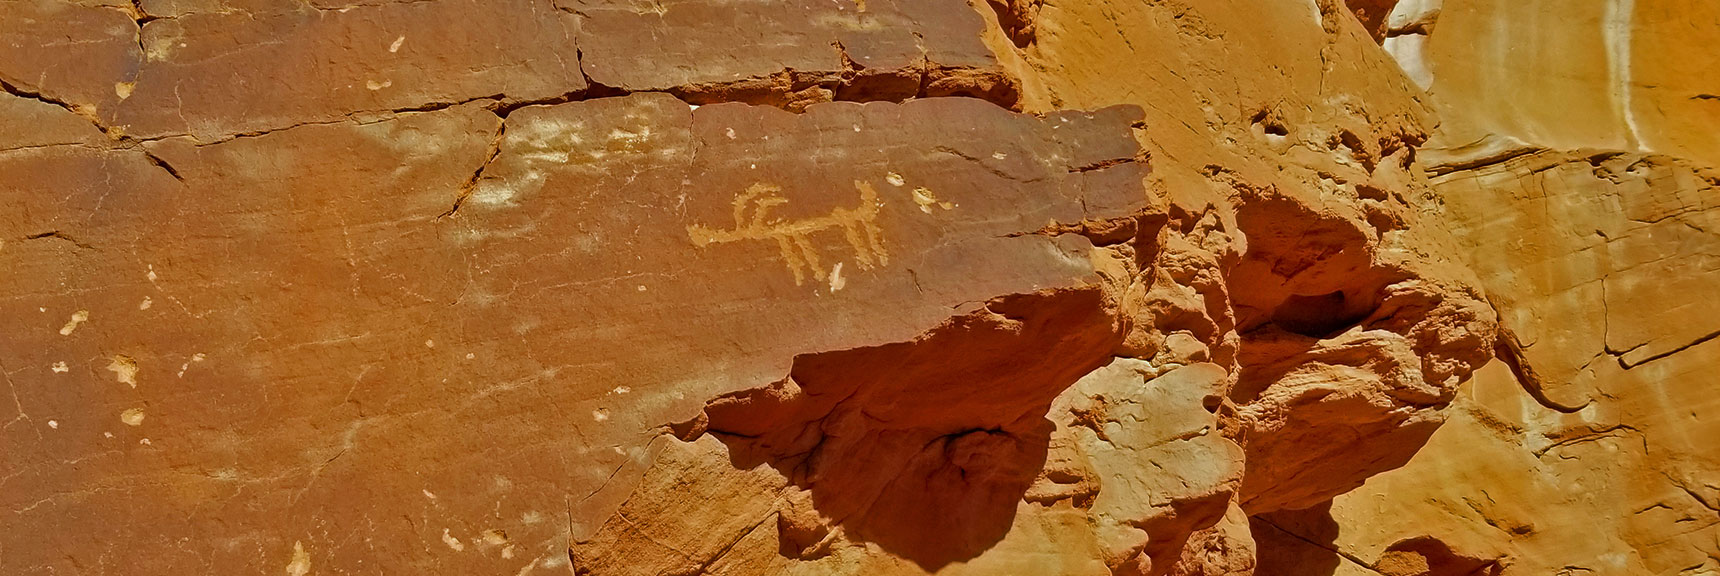 Petroglyphs or Graffiti at the Rainbow Vista Trailhead in Valley of Fire State Park, Nevada?